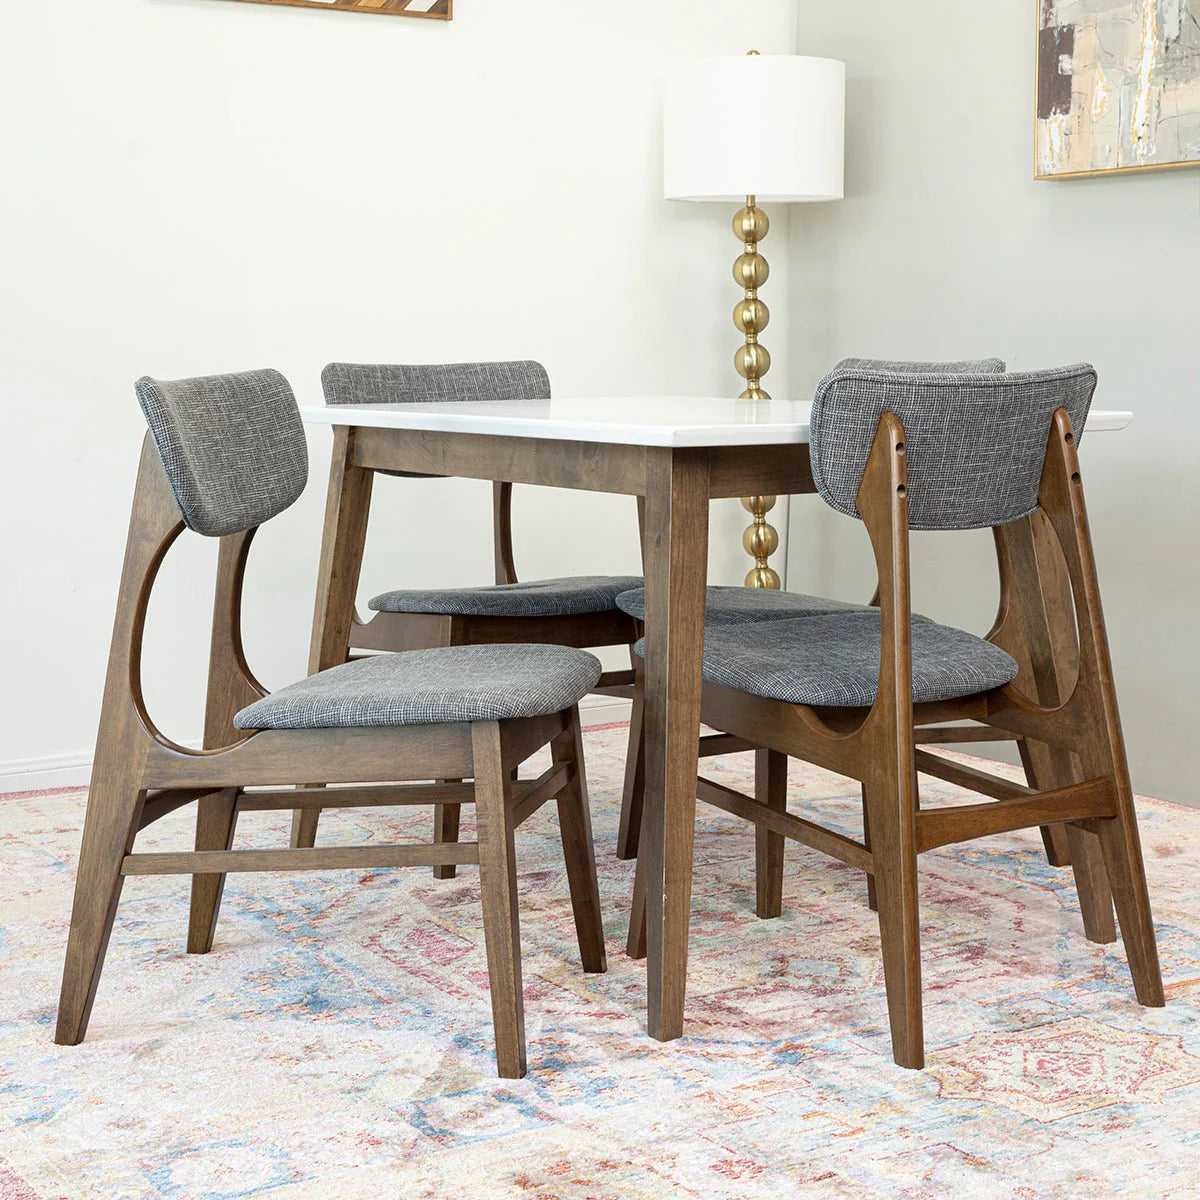 Dining Set , Alpine Small Table (White) with 4 Collins Chairs (Grey)